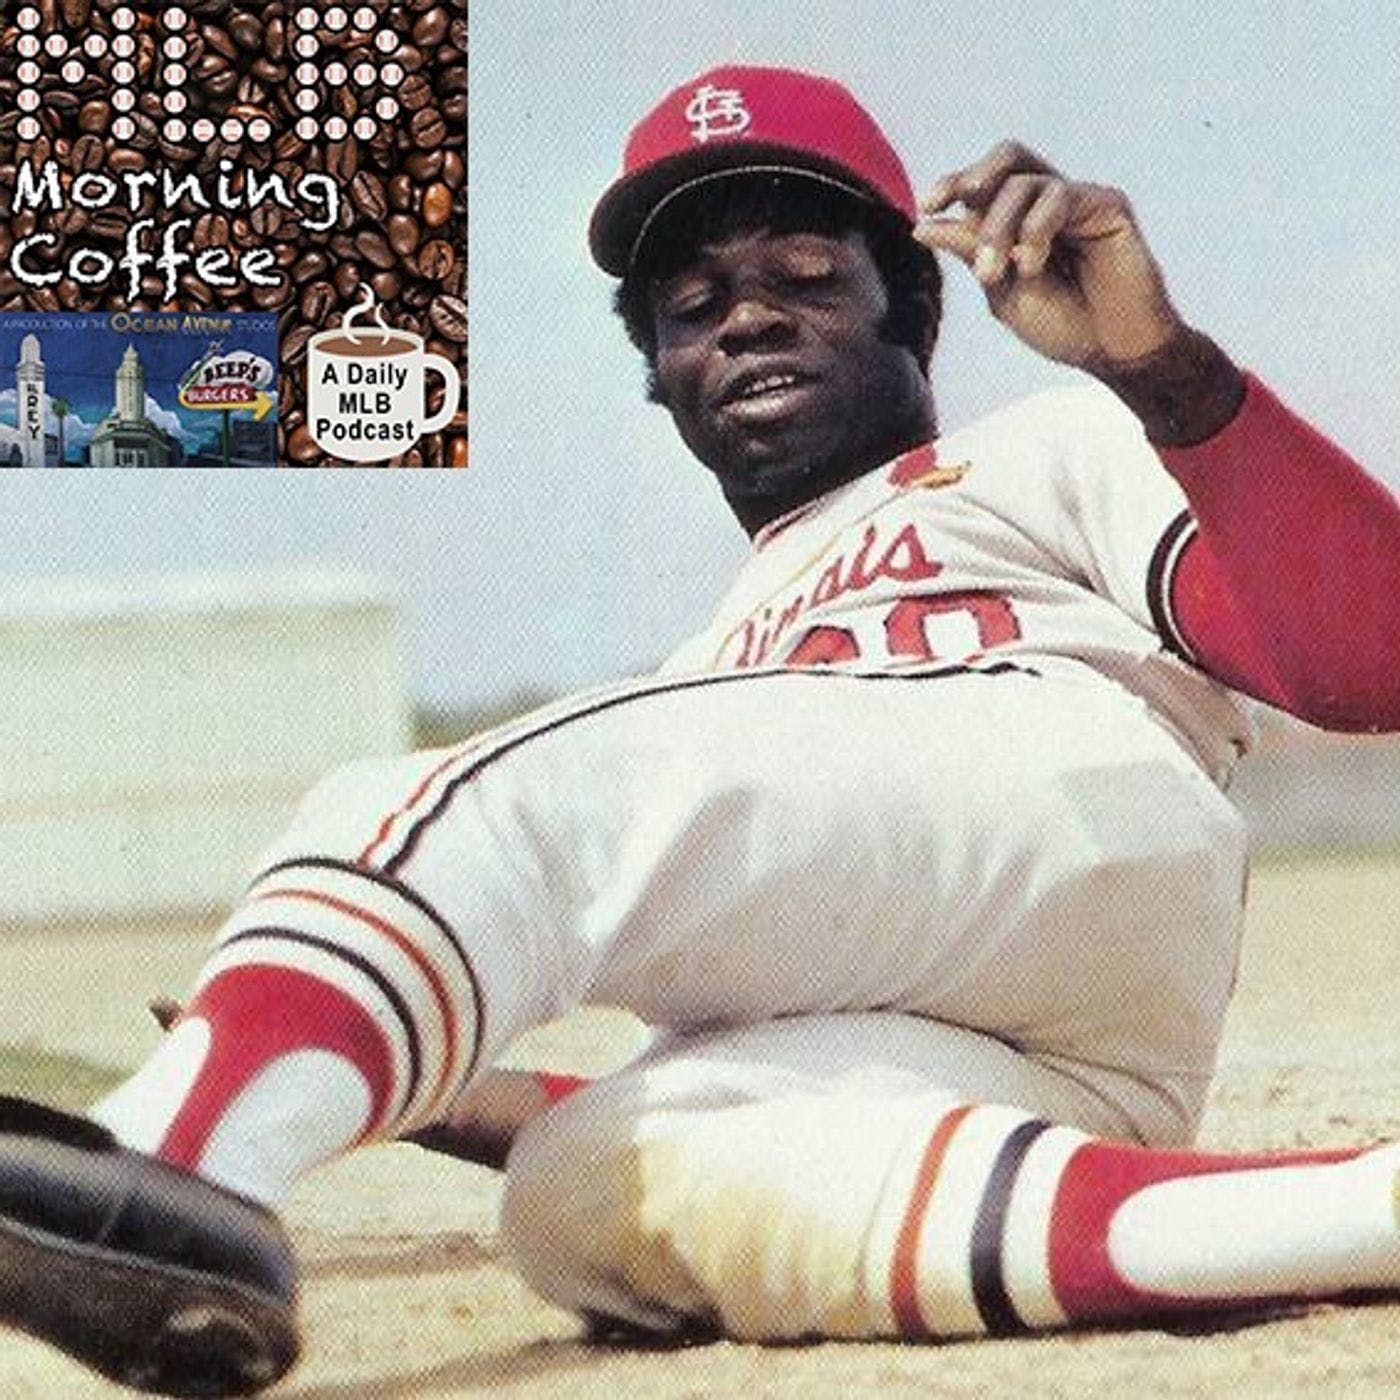 Weekend Whiparound (September 4th, 5th, & 6th) & Remembering Lou Brock